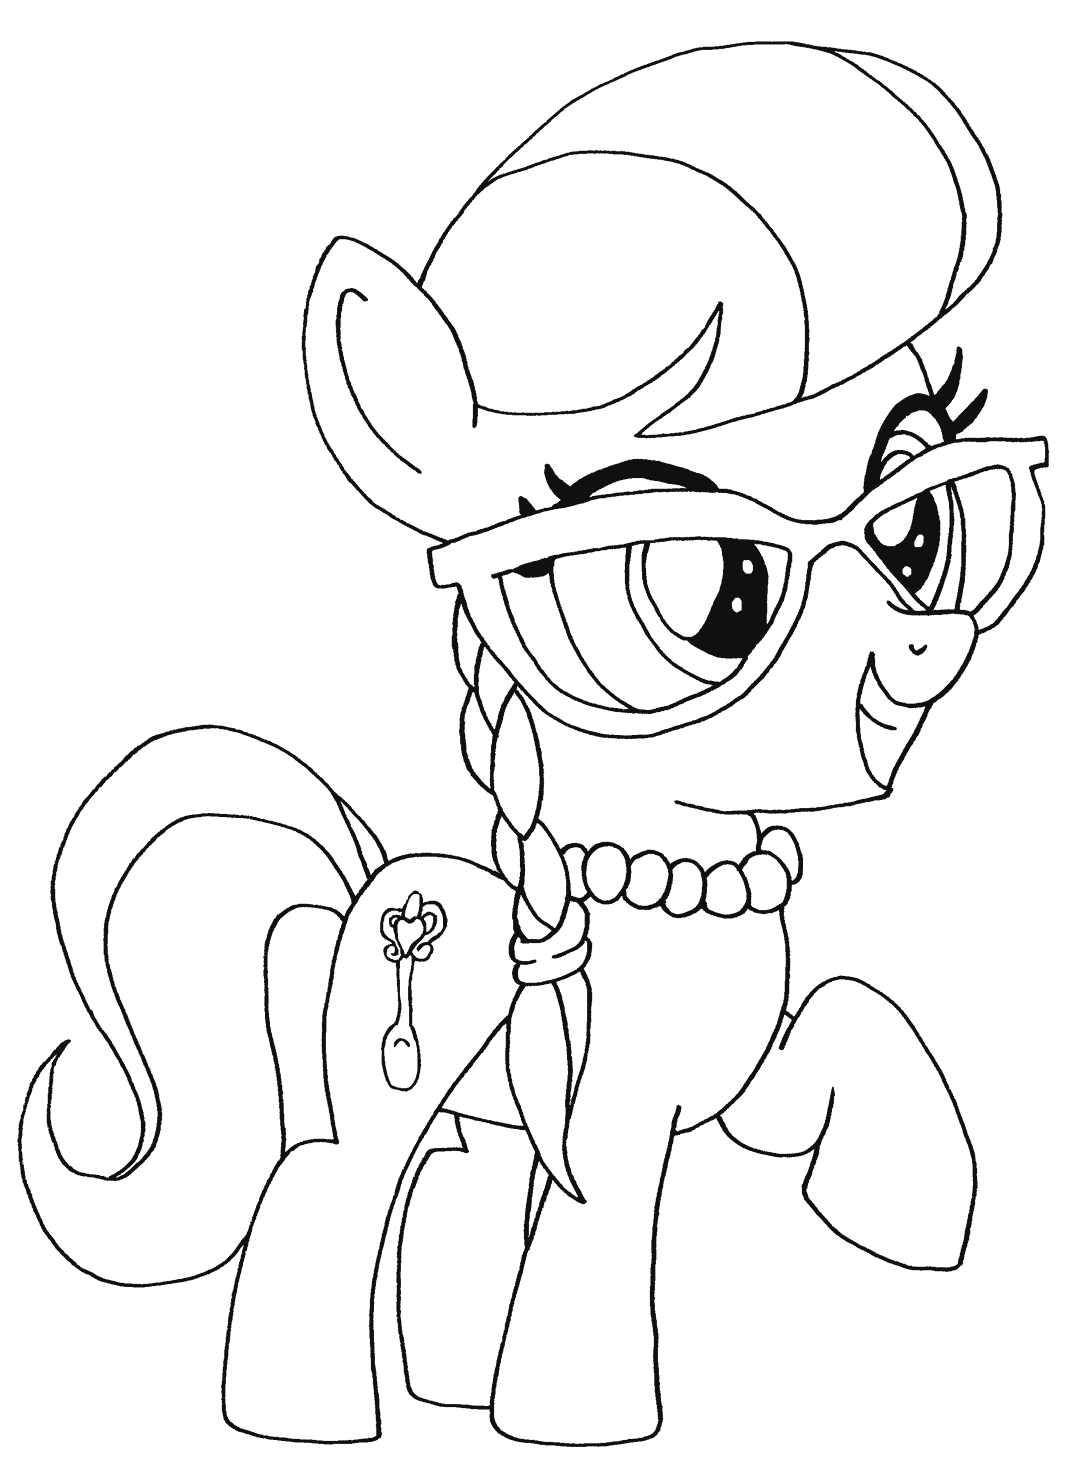 Silver Spoon My Little Pony Coloring Page